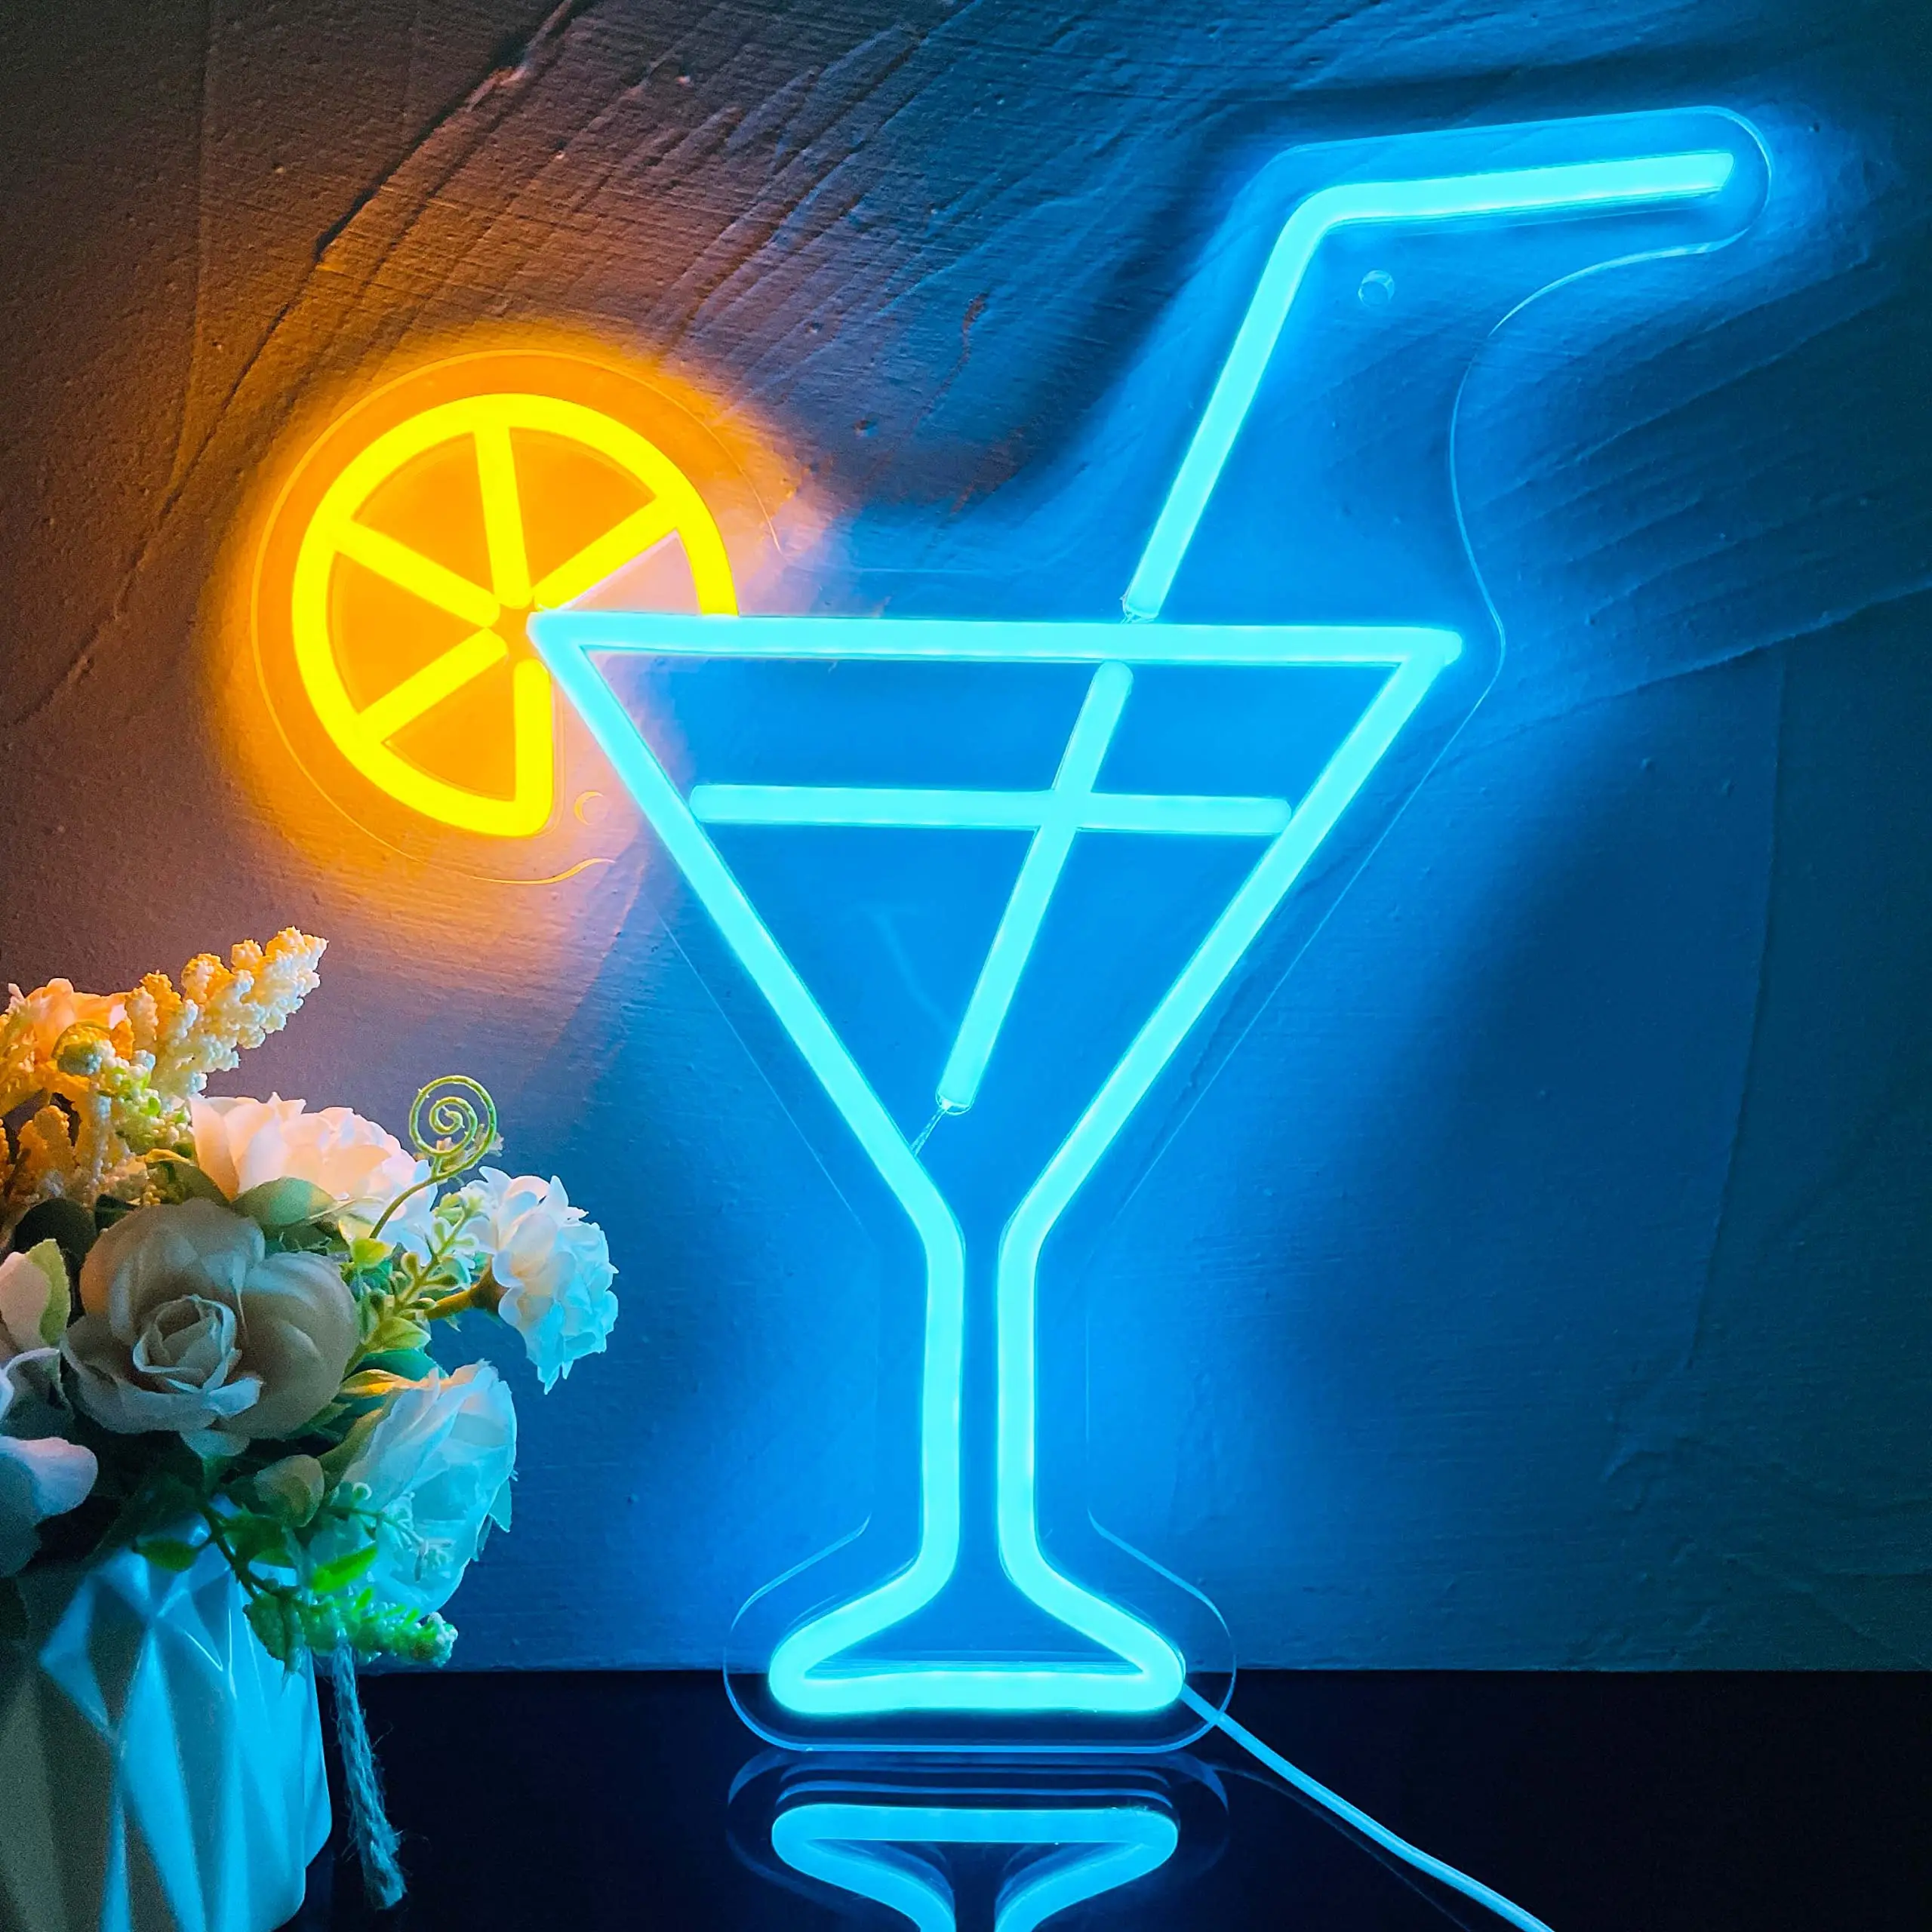 

Cocktails Cup with Lemon Neon Light Neon Bar Sign Bedroom Wall Hanging Neon Decoration for Cocktail Bar Home Bar Man Cave Decor